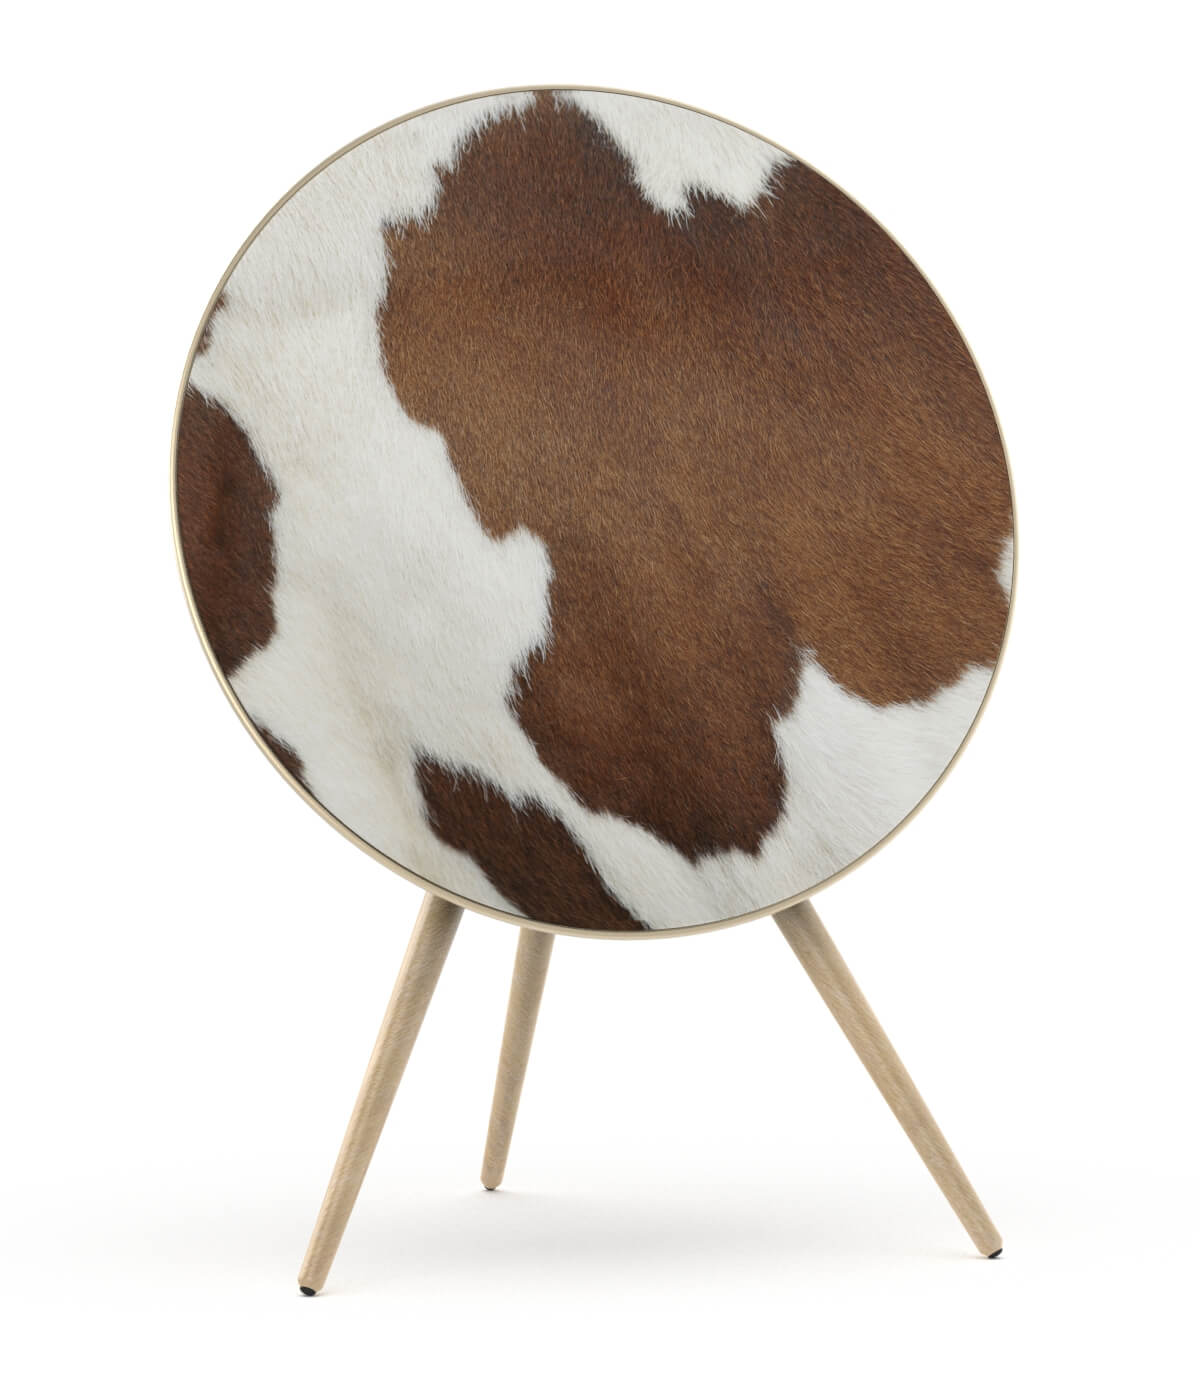 Skiniplay cover Cow for Bang & Olufsen Beoplay A9 and Beosound A9 speaker